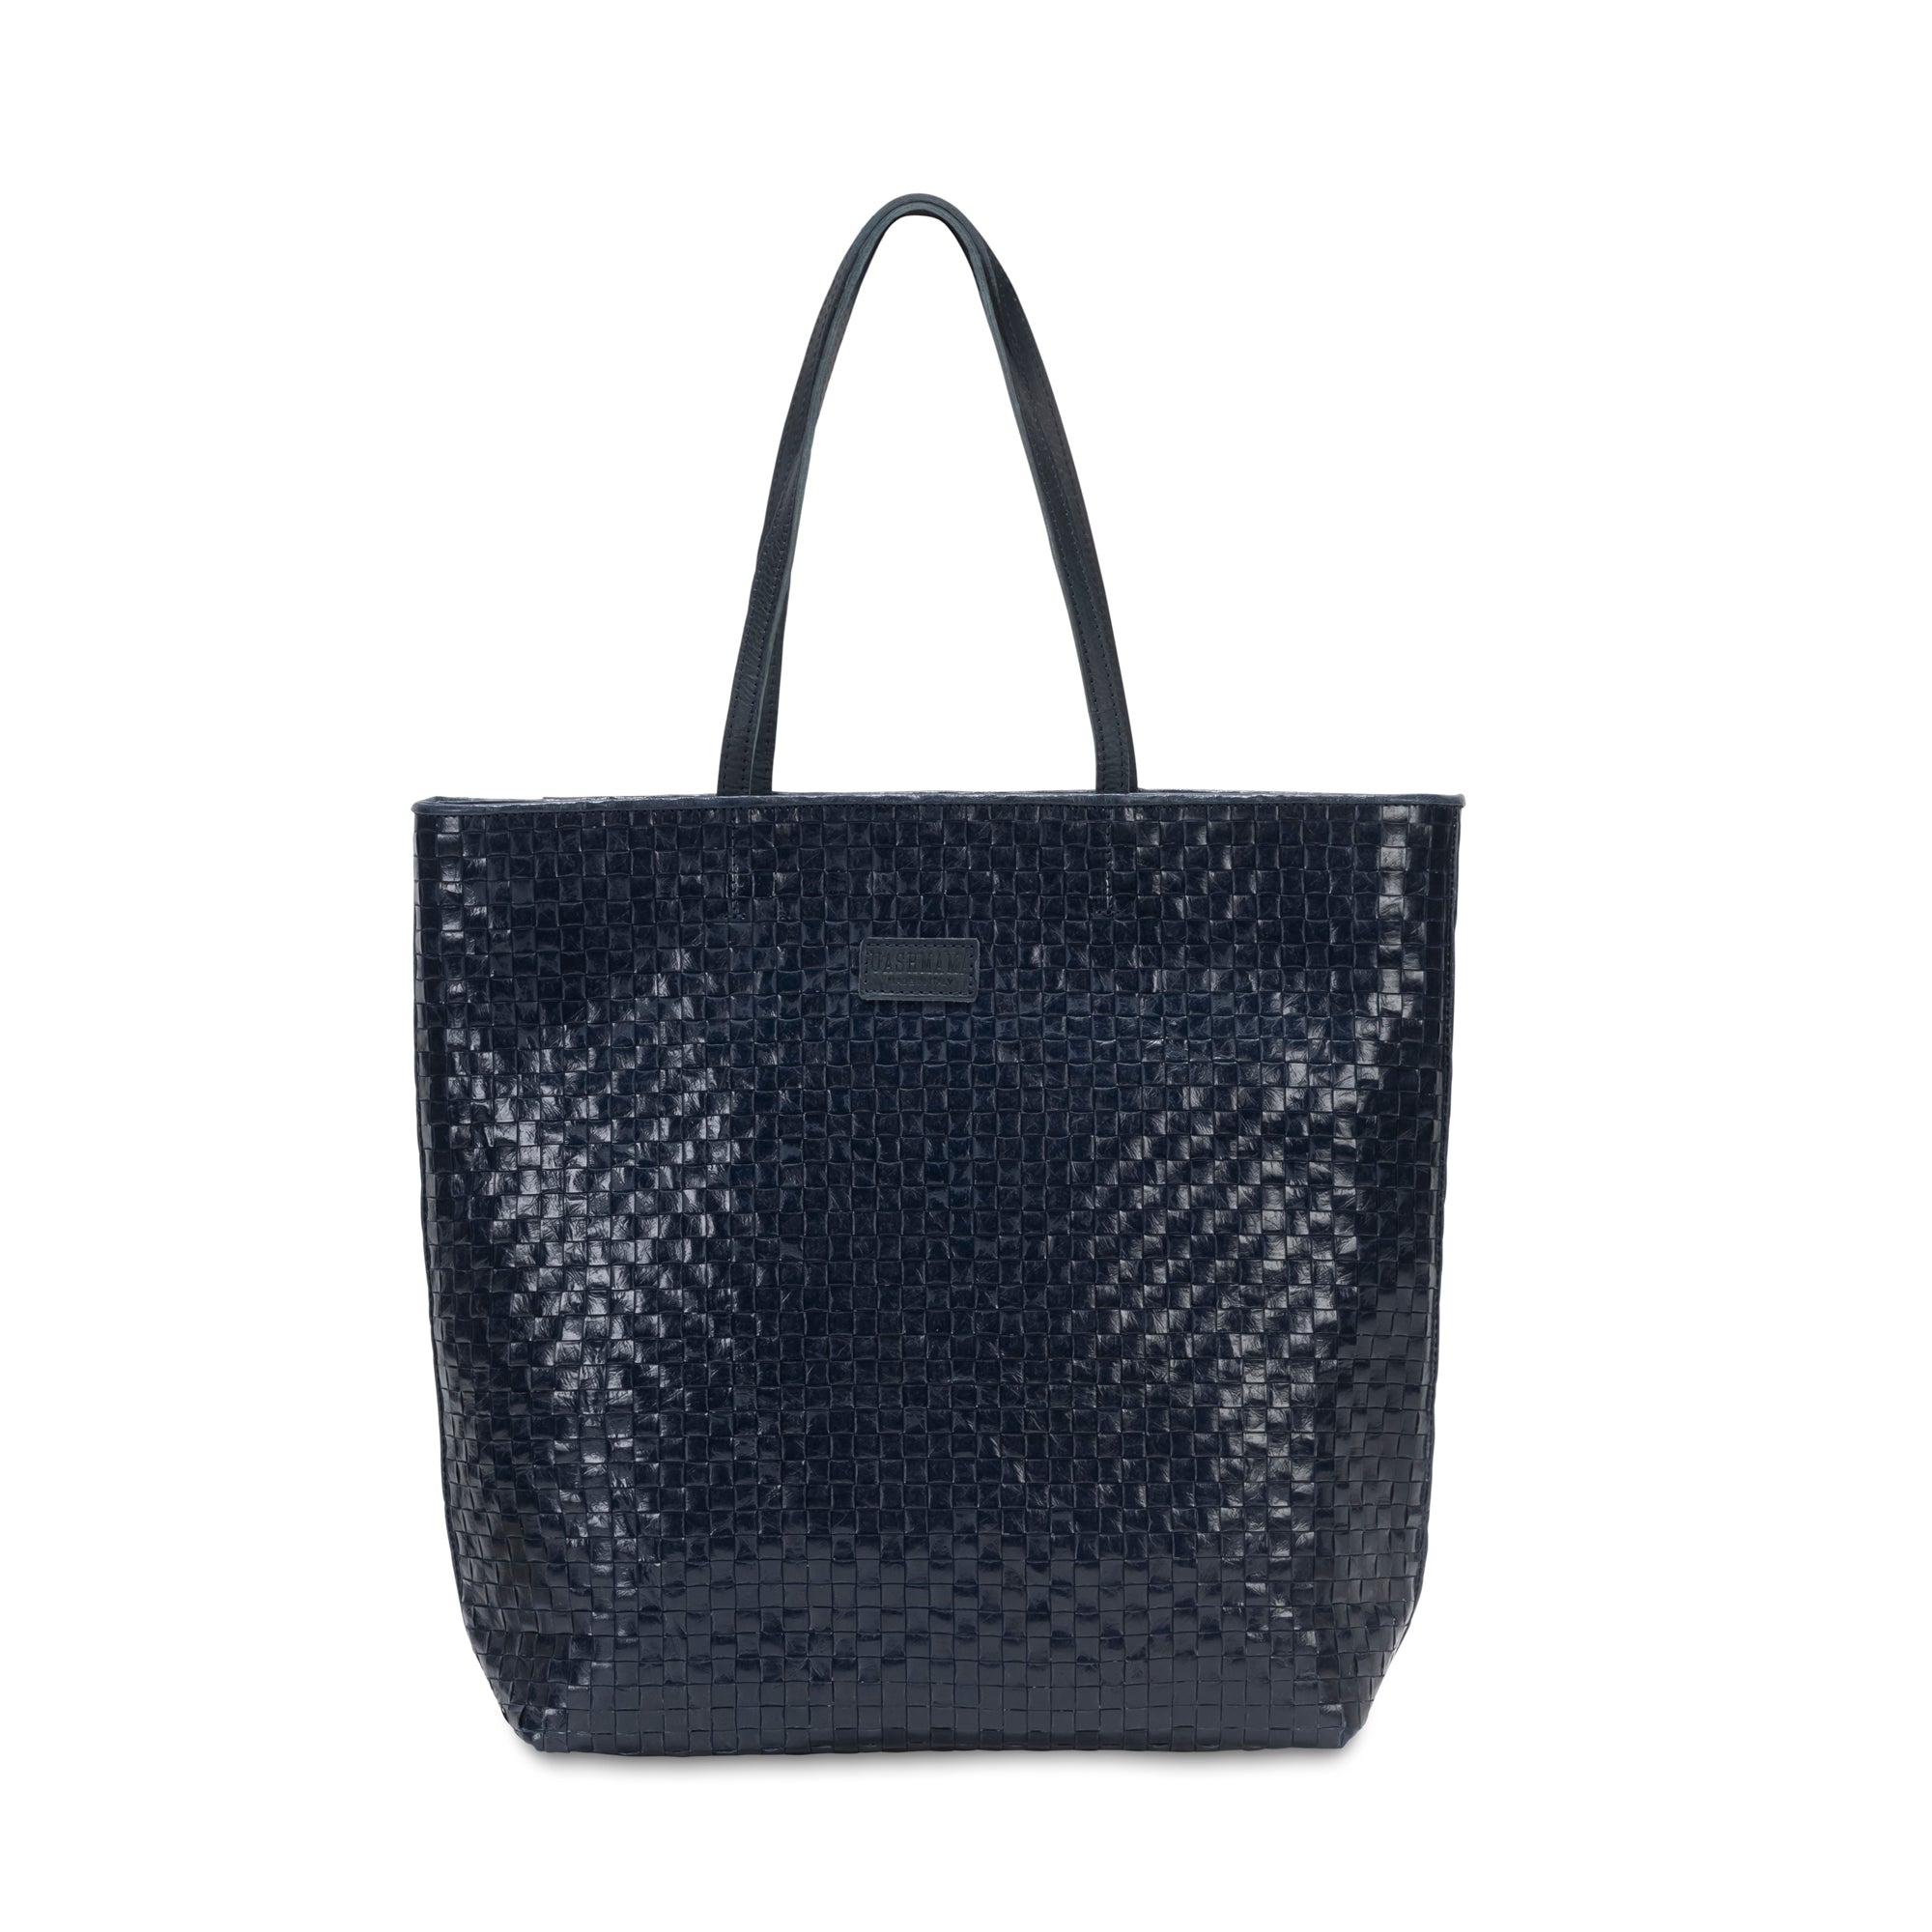 TOSCA WOVEN OVERSIZED TOTE BAG